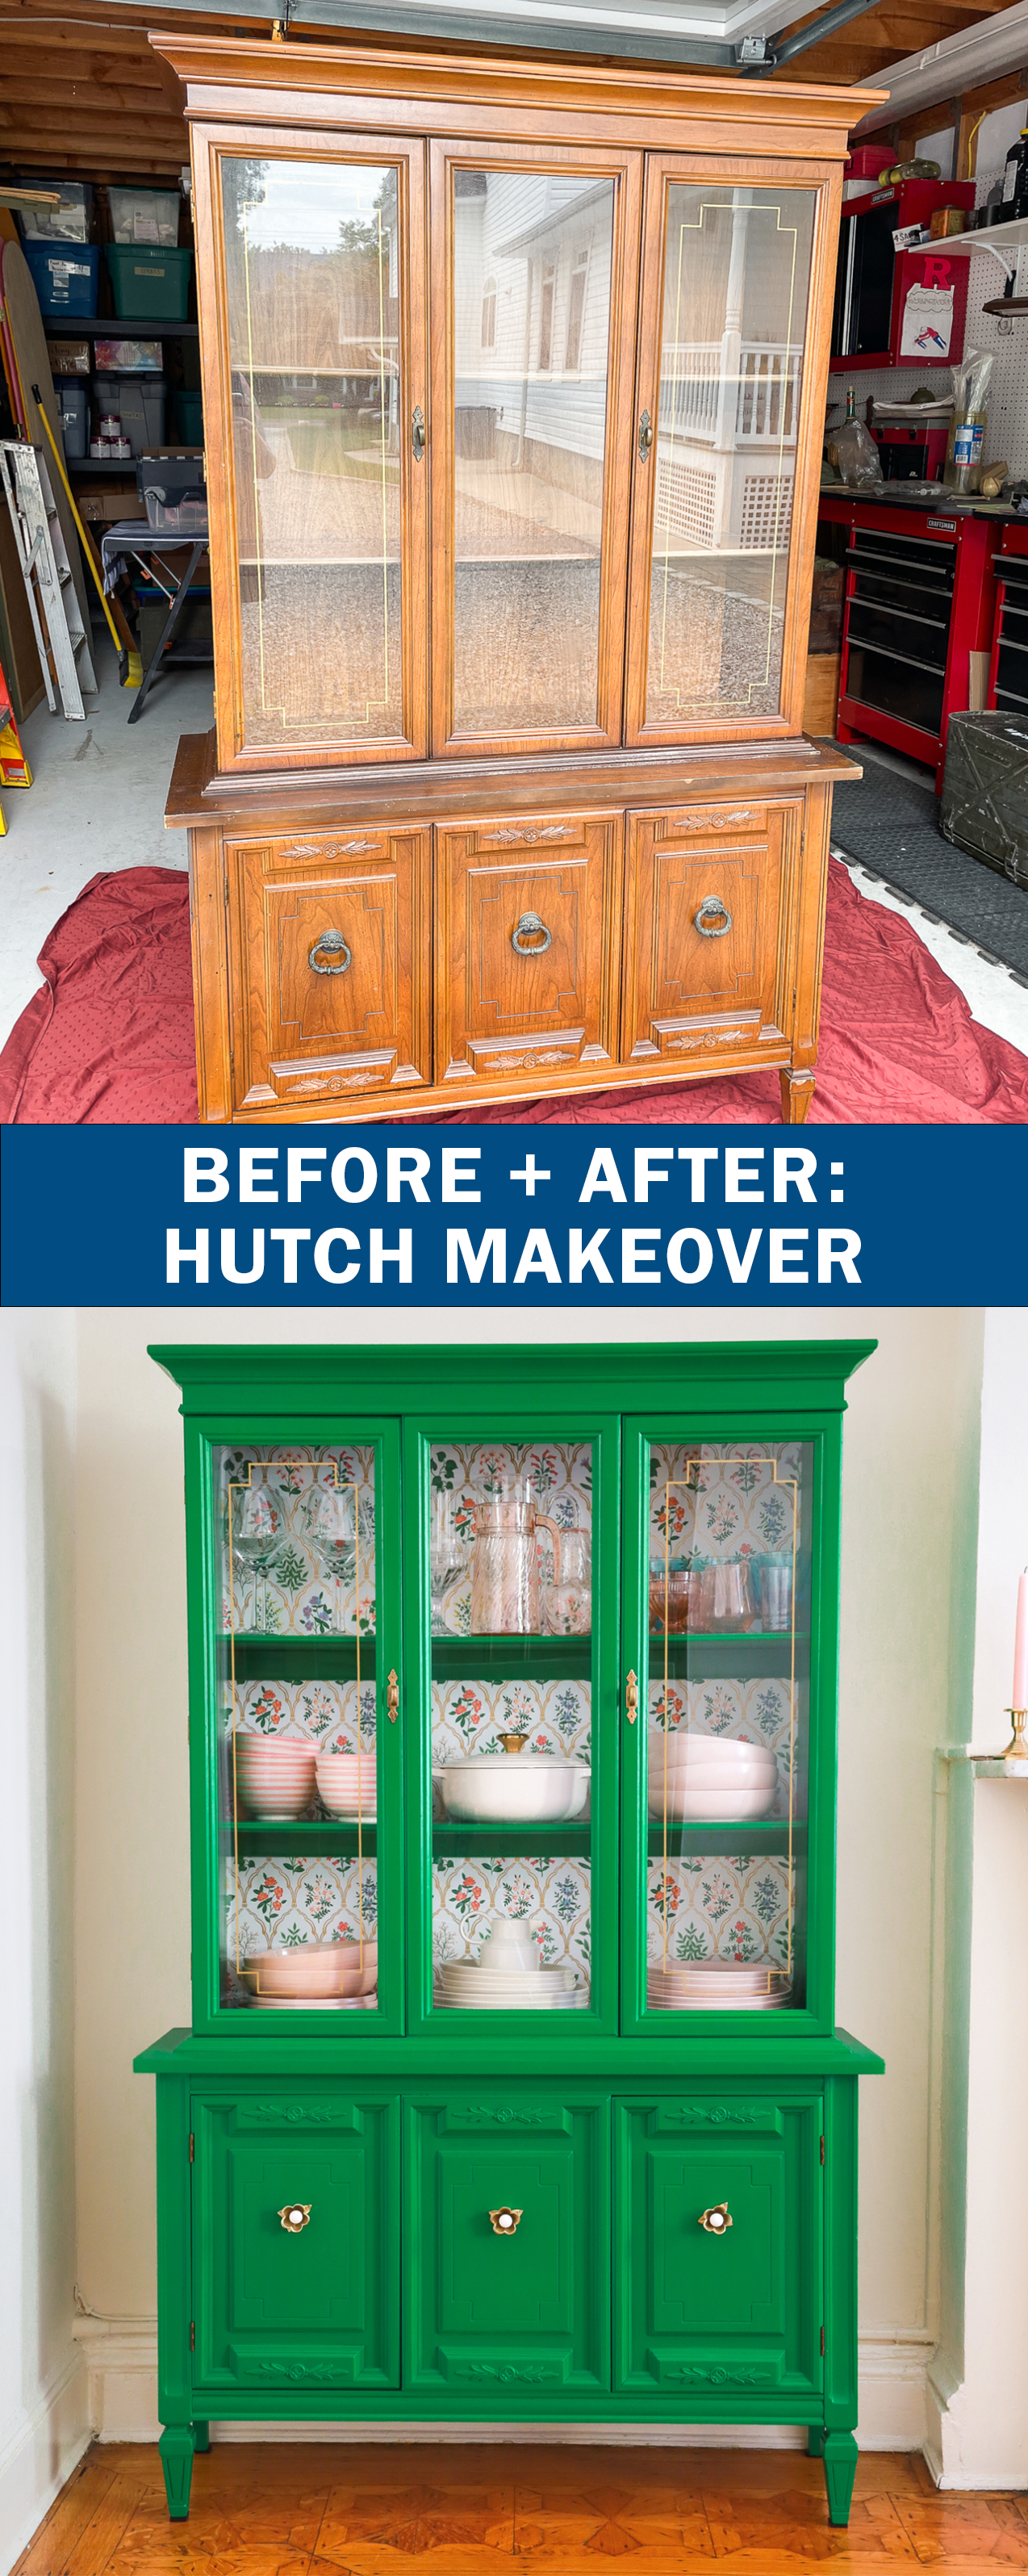 Before and After: Hutch Makeover